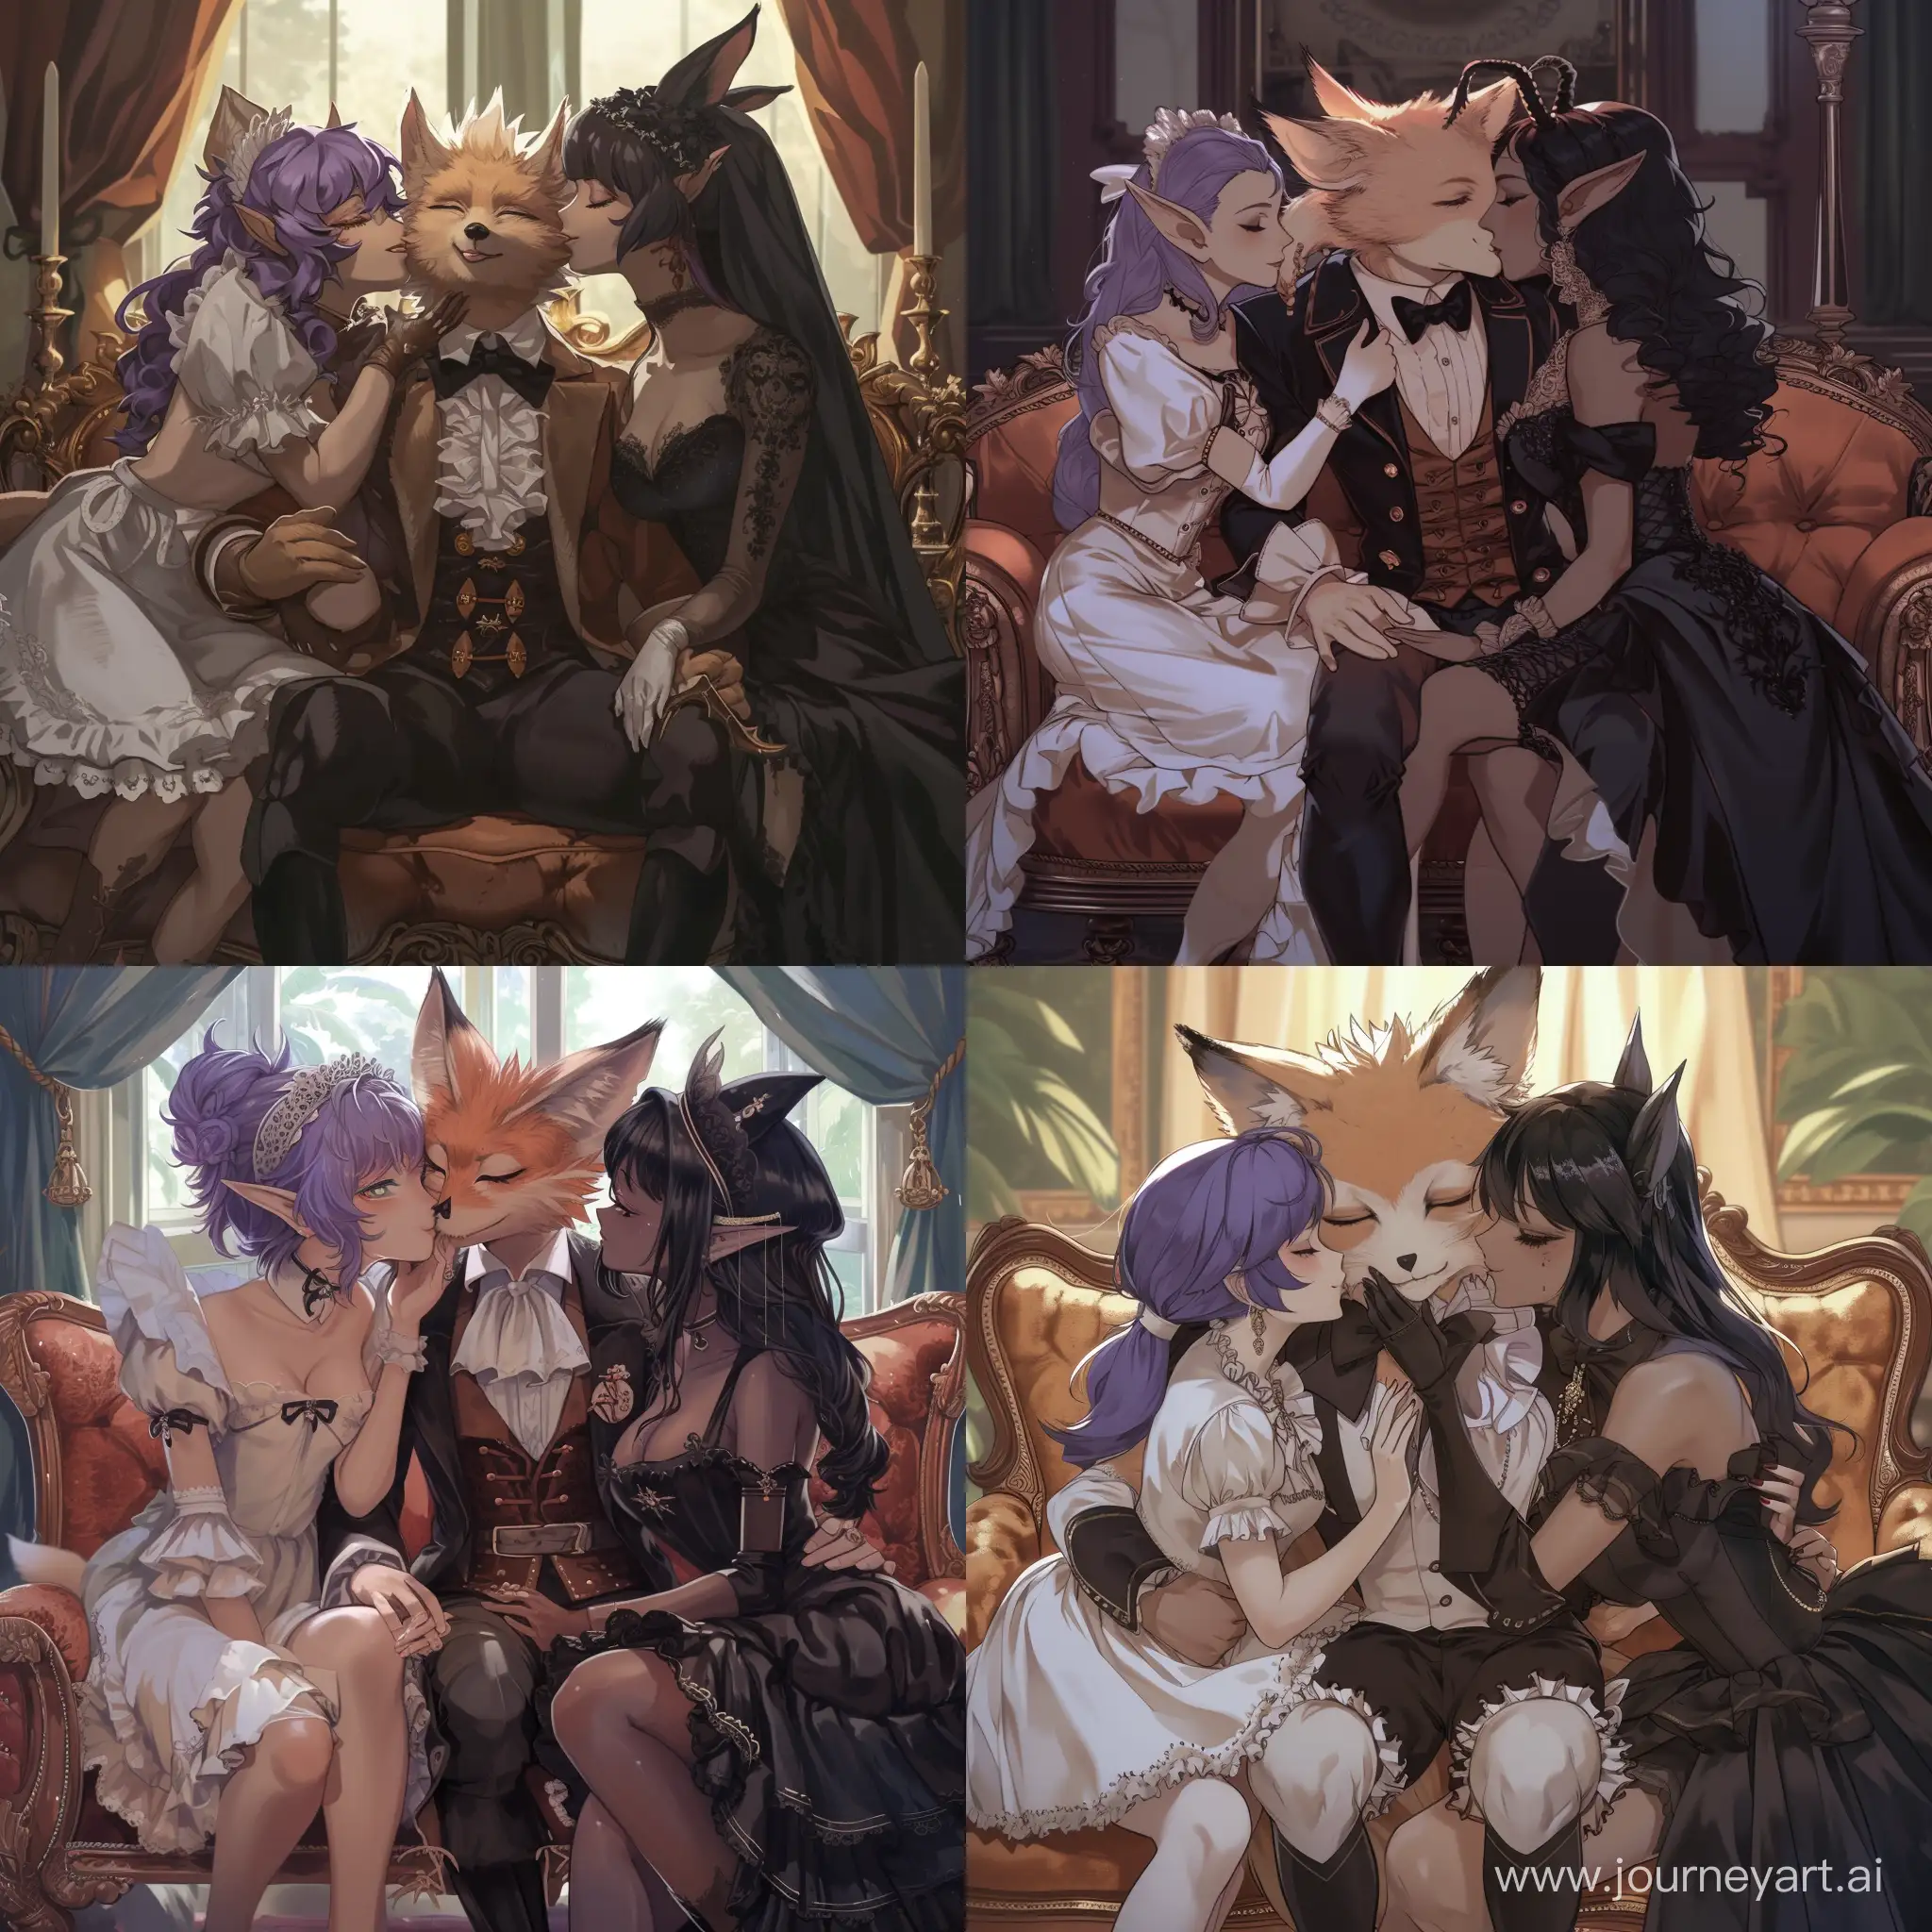 Whimsical-Furry-Fennec-Aristocrat-Romance-with-Elf-and-Dark-Elf-Companions